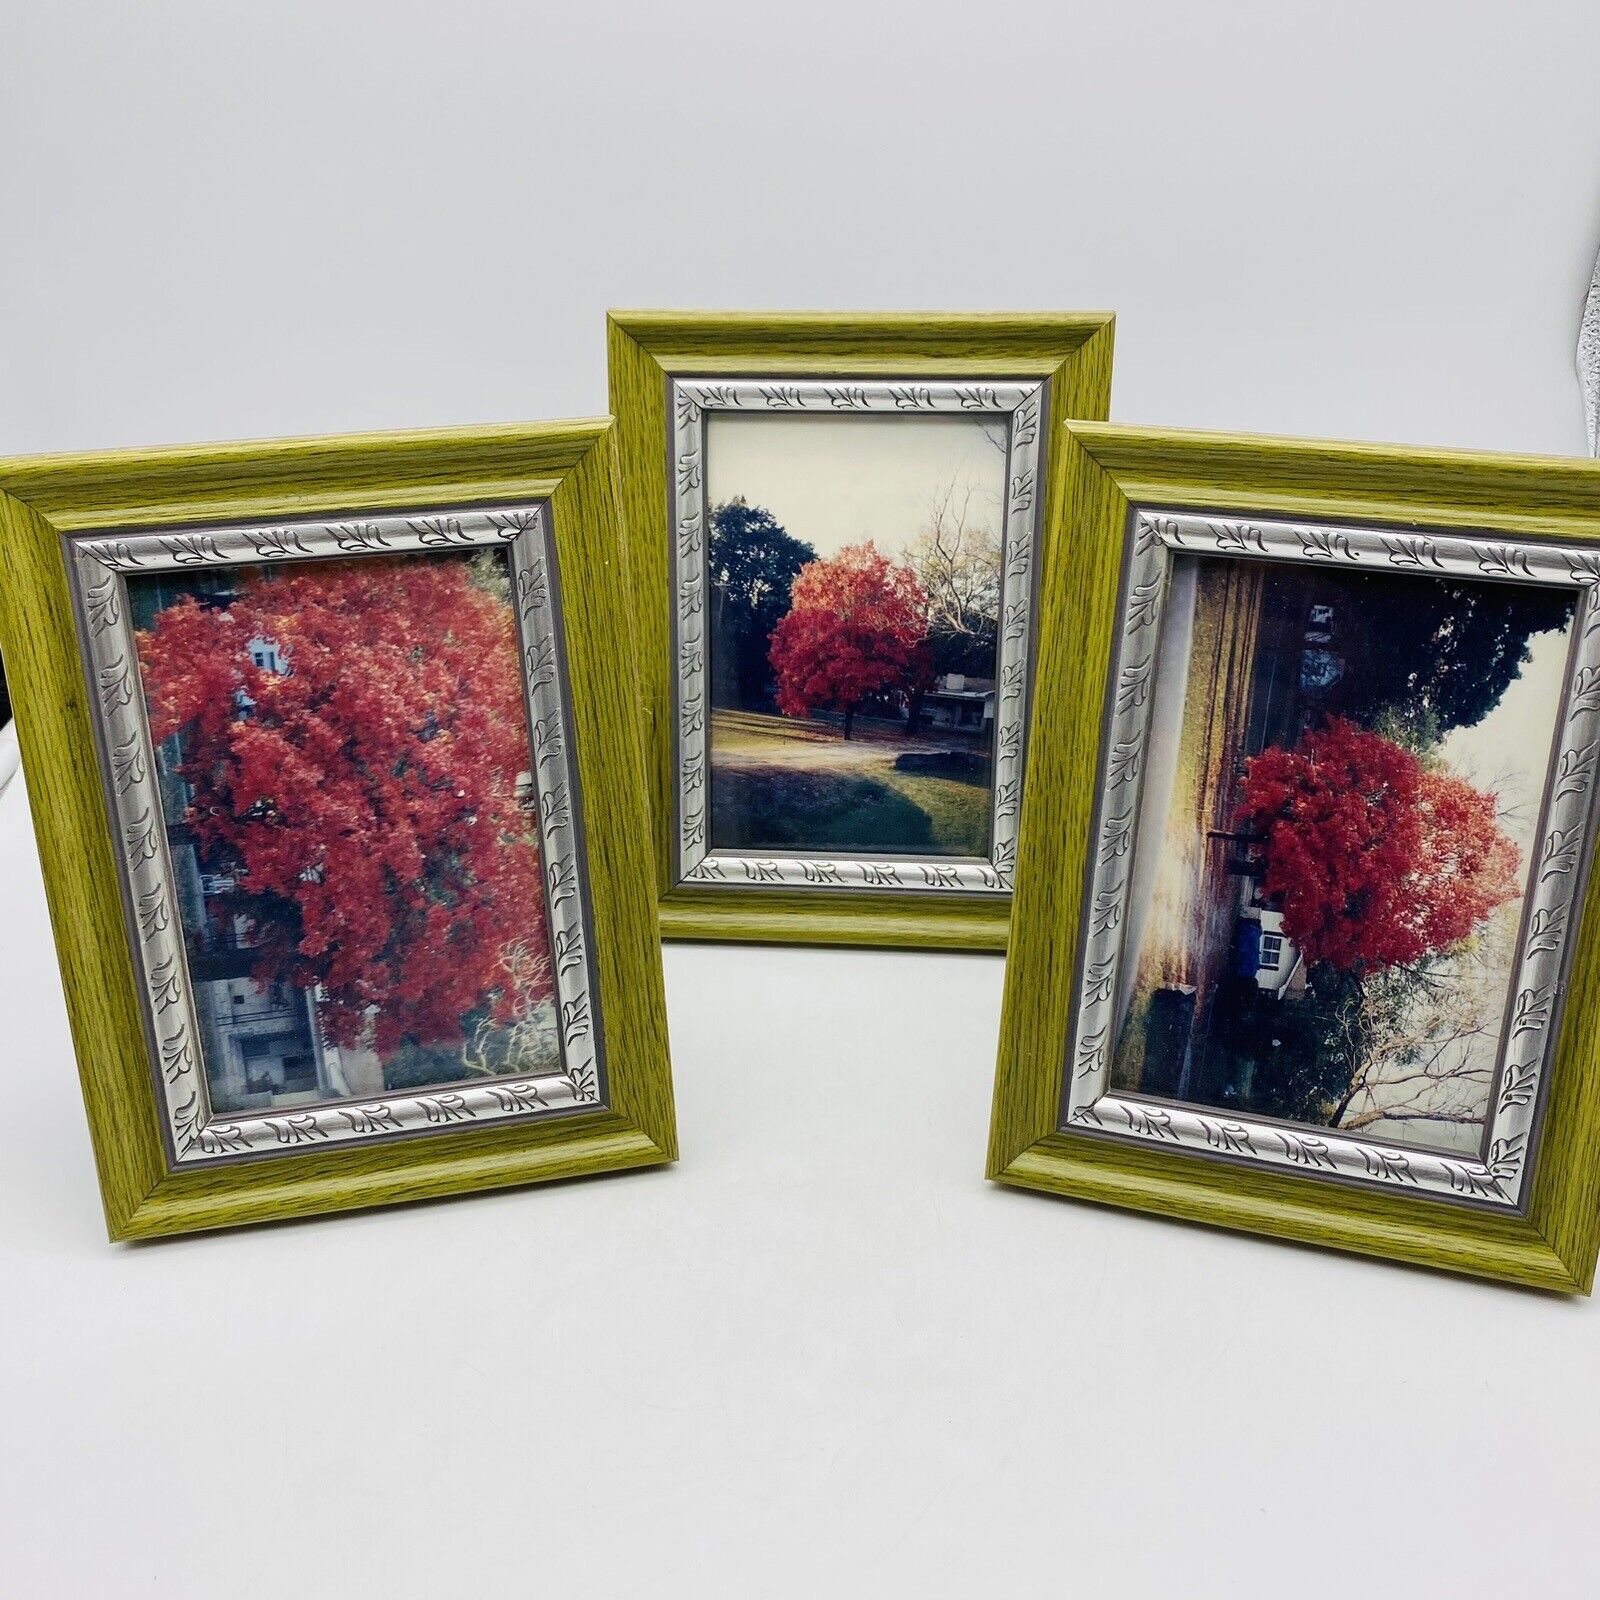 Set Of 3 Vintage Wood Picture Frames with Green Accent Photos Of Trees & House